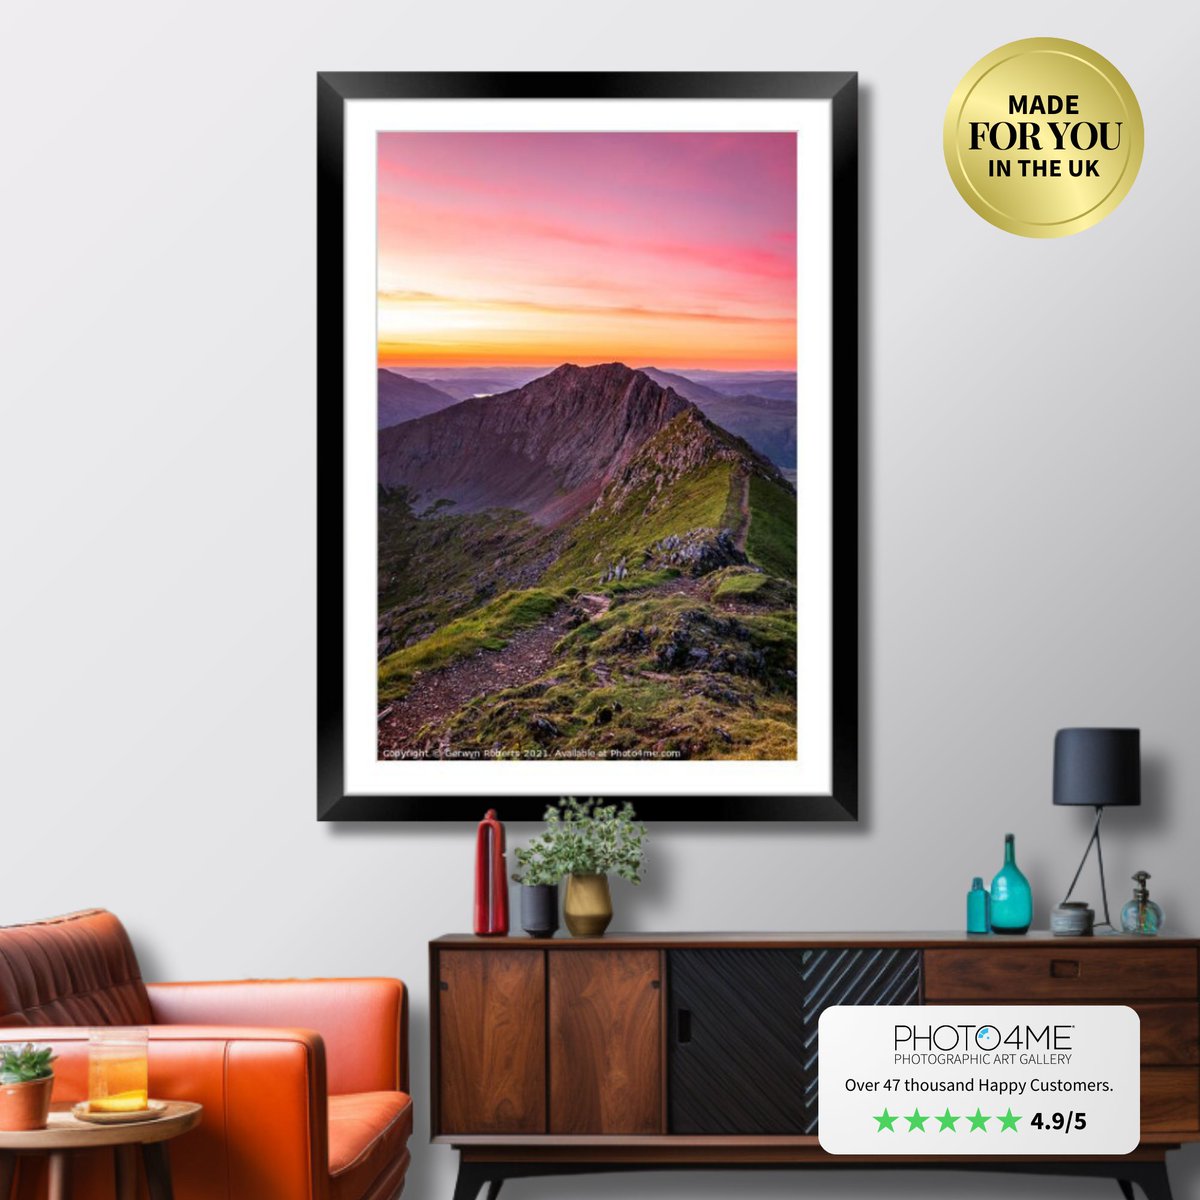 Find the perfect Personalised Gift with our stunning wall art. Shop now: photo4me.com/shop/wall-art/… or upload your own photo for a custom gift: printshop.photo4me.com. 0% interest with PayPal Pay in 3! #PersonalisedGifts